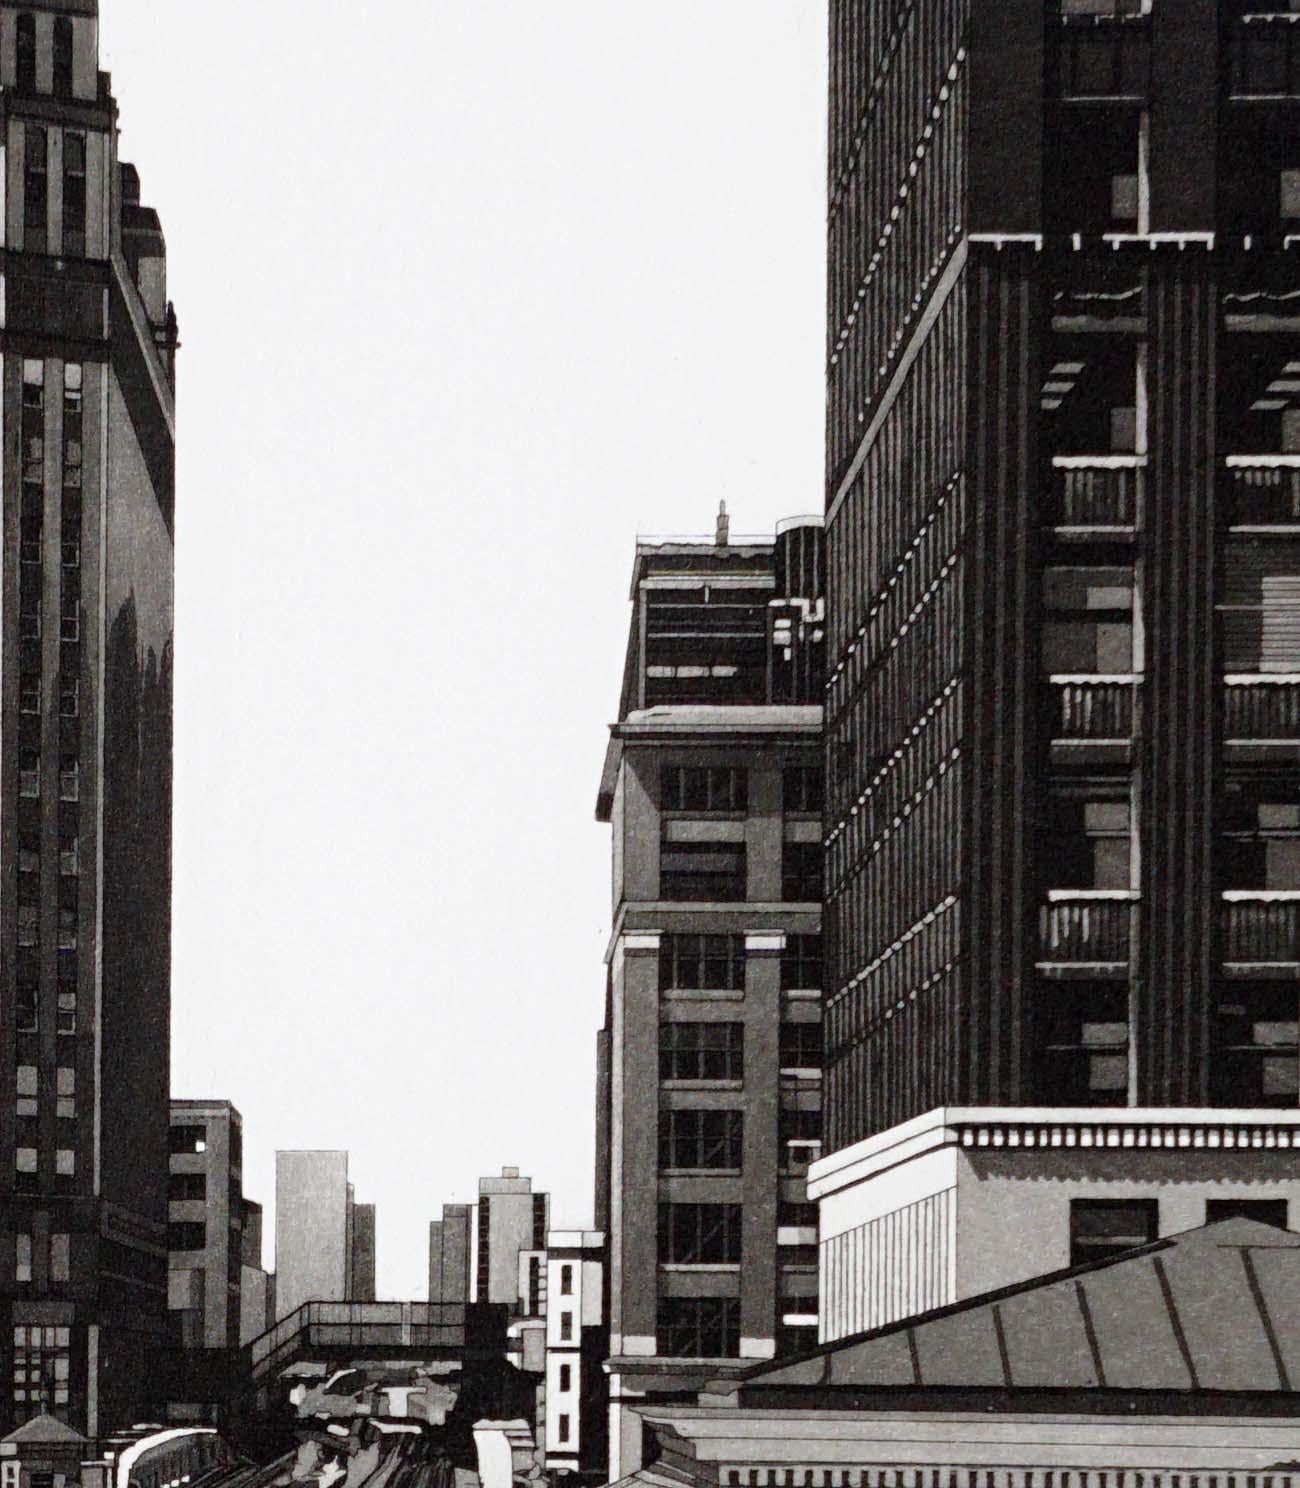 Waiting For My Train(track crossings that create Chicago EL / Merchandise Mart) - Print by Martin Levine